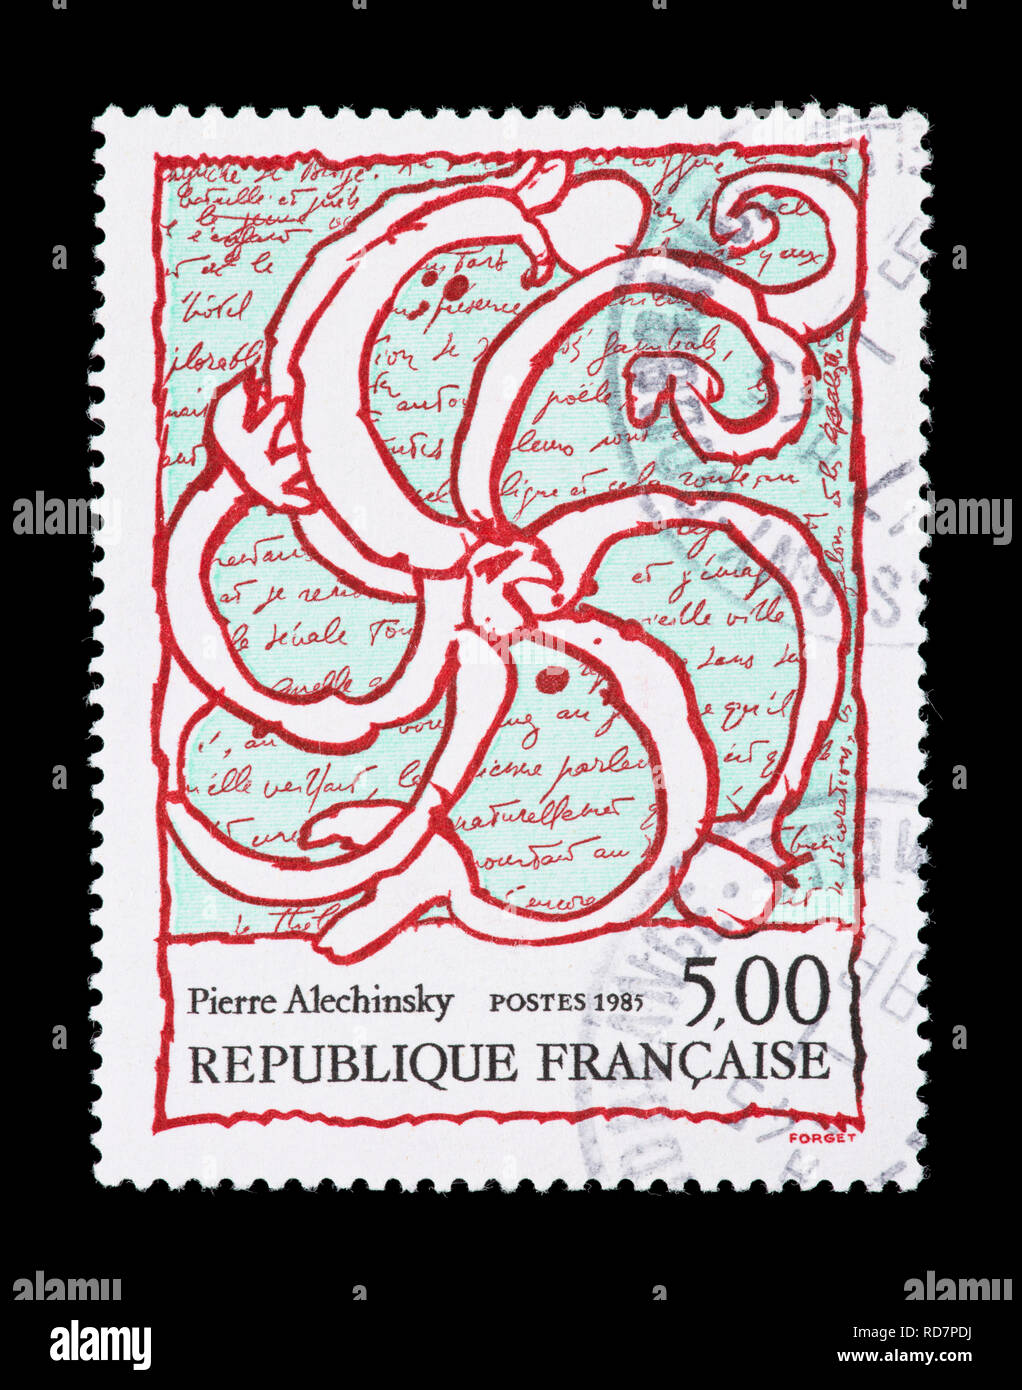 Postage stamp from France depicting the Pierre Alechinsky artwork Octopus Overlaid on Manuscript. Stock Photo